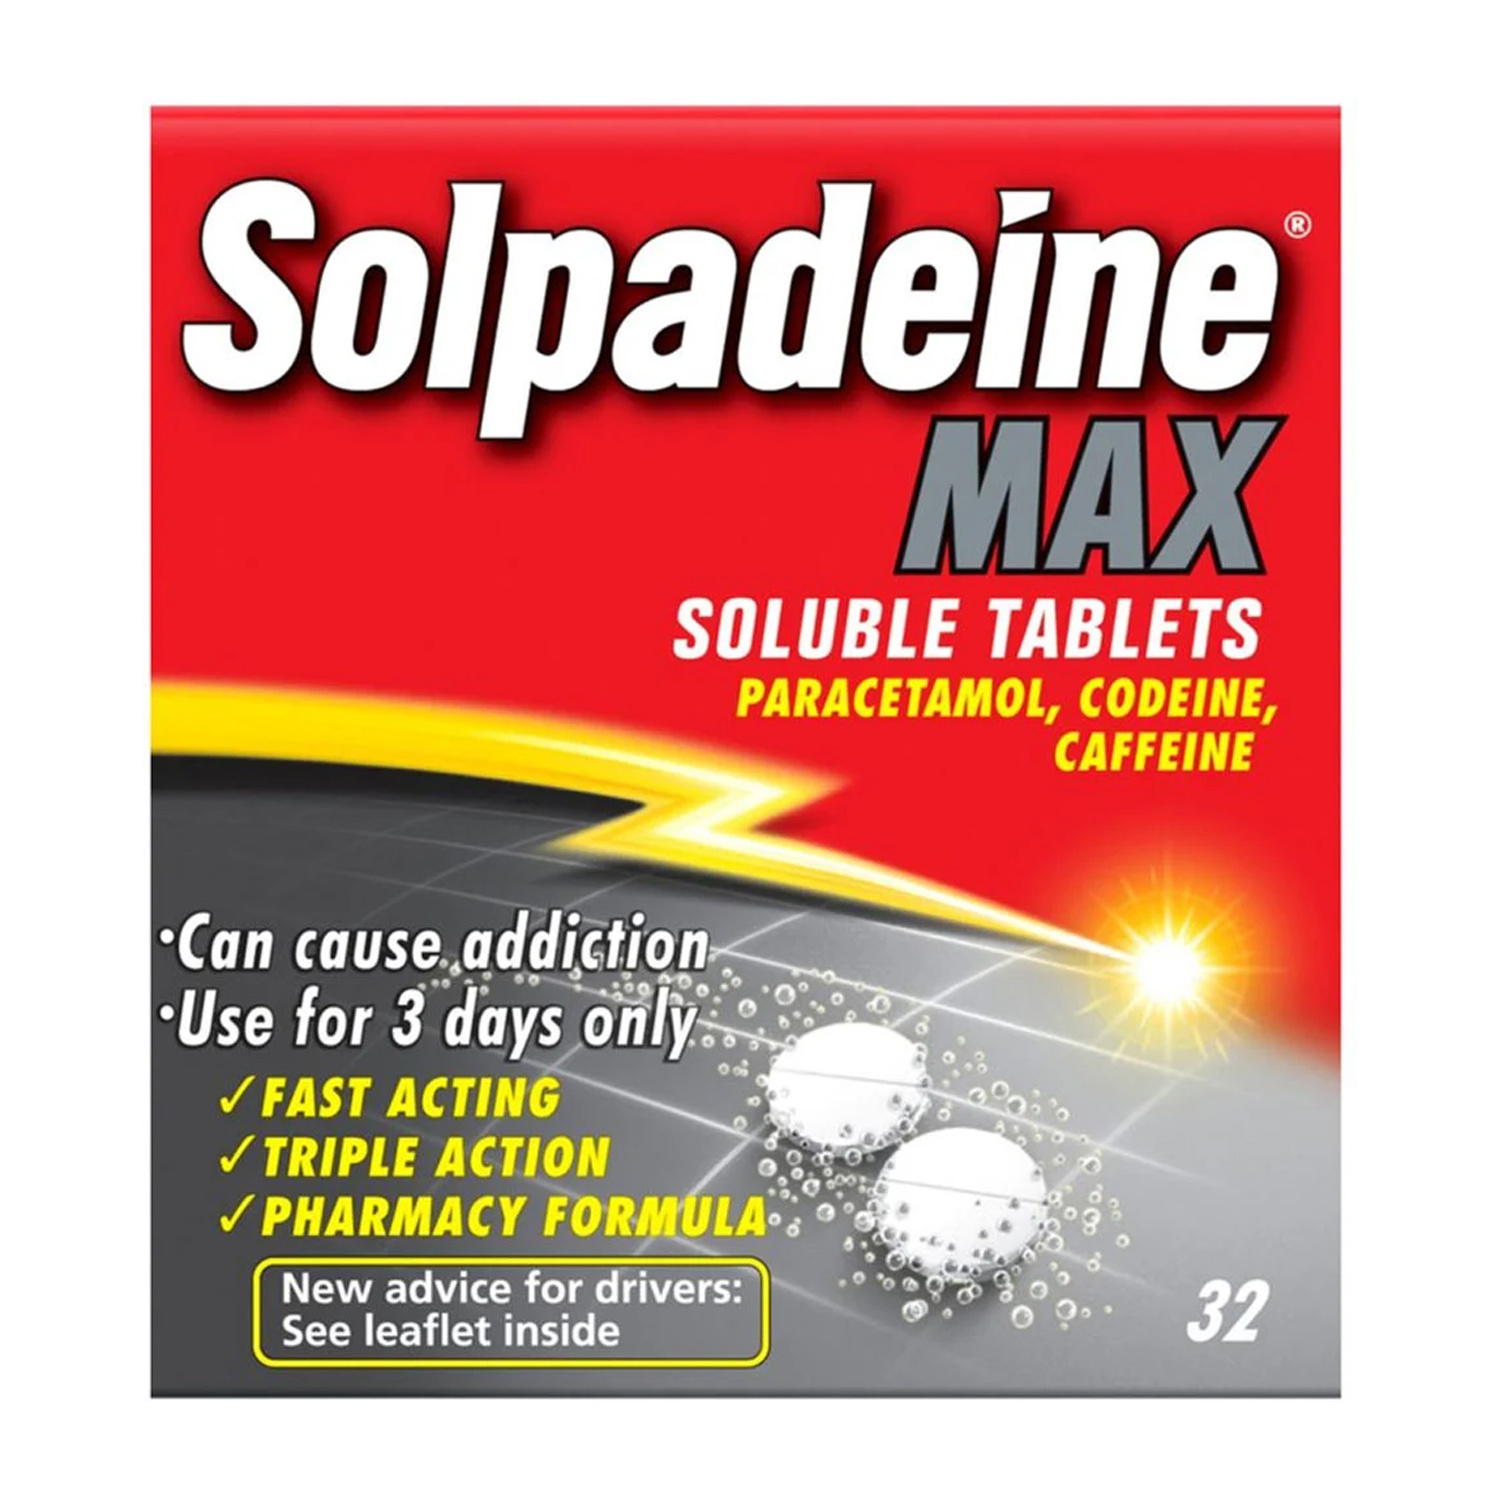 Solpadeine Max Soluble Tablets